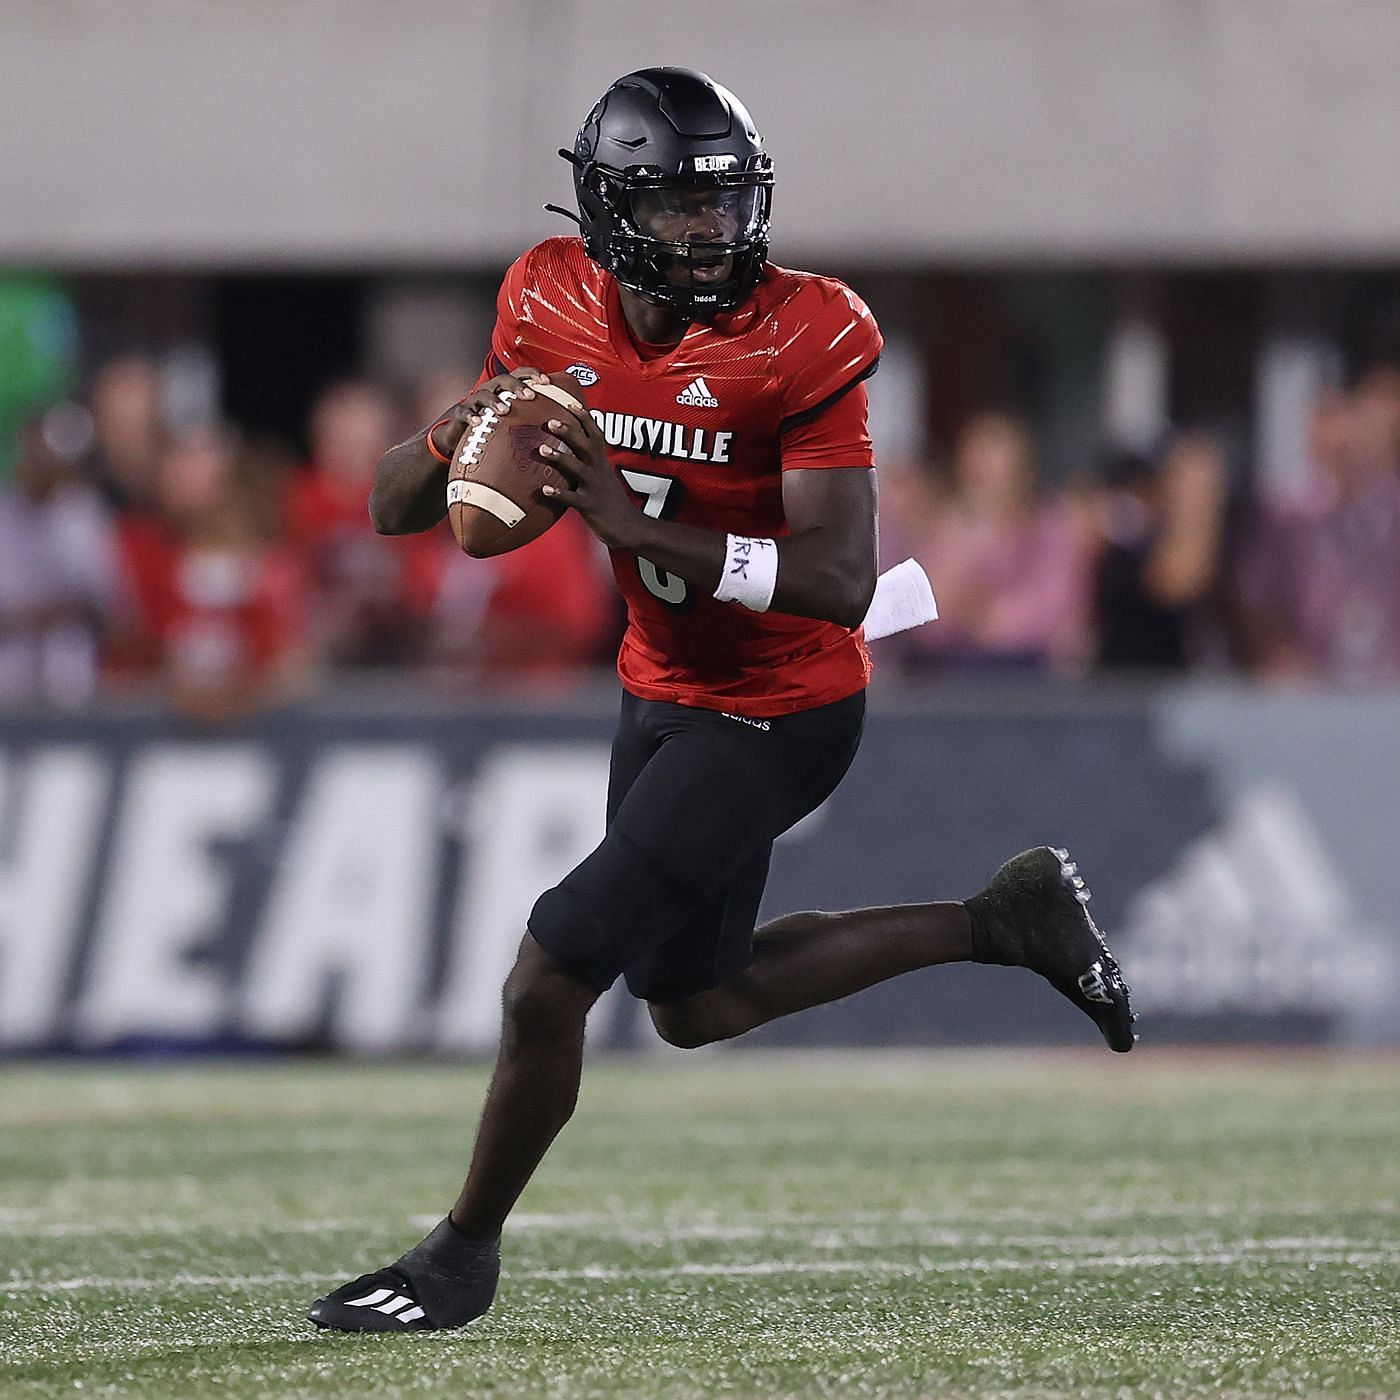 Can Malik Cunningham and the Louisville Cardinal pull off the upset over Wake Forest?